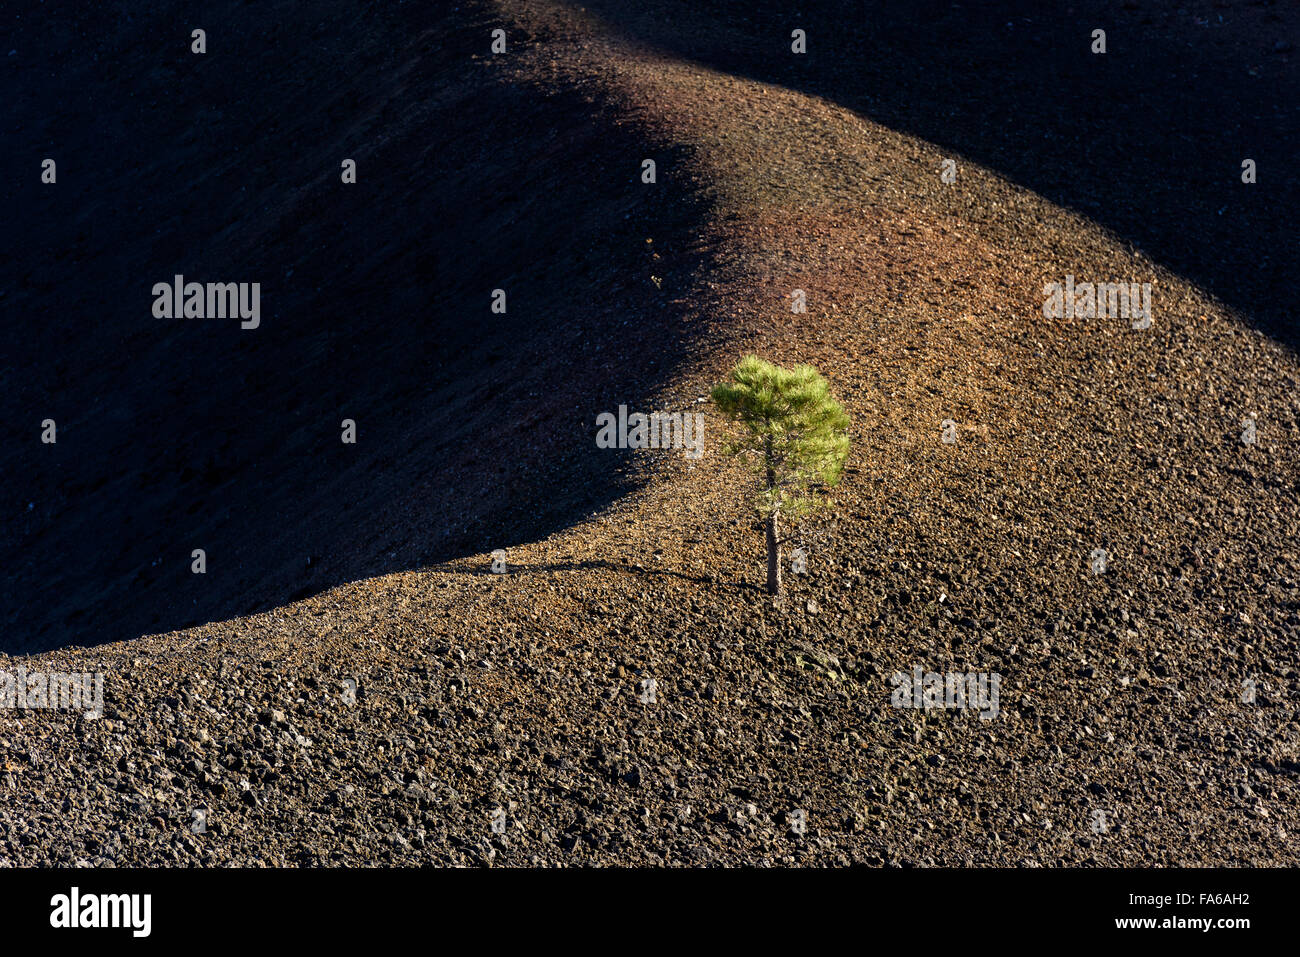 Elevated view of cinder cone tree in lava beds, California, United States Stock Photo